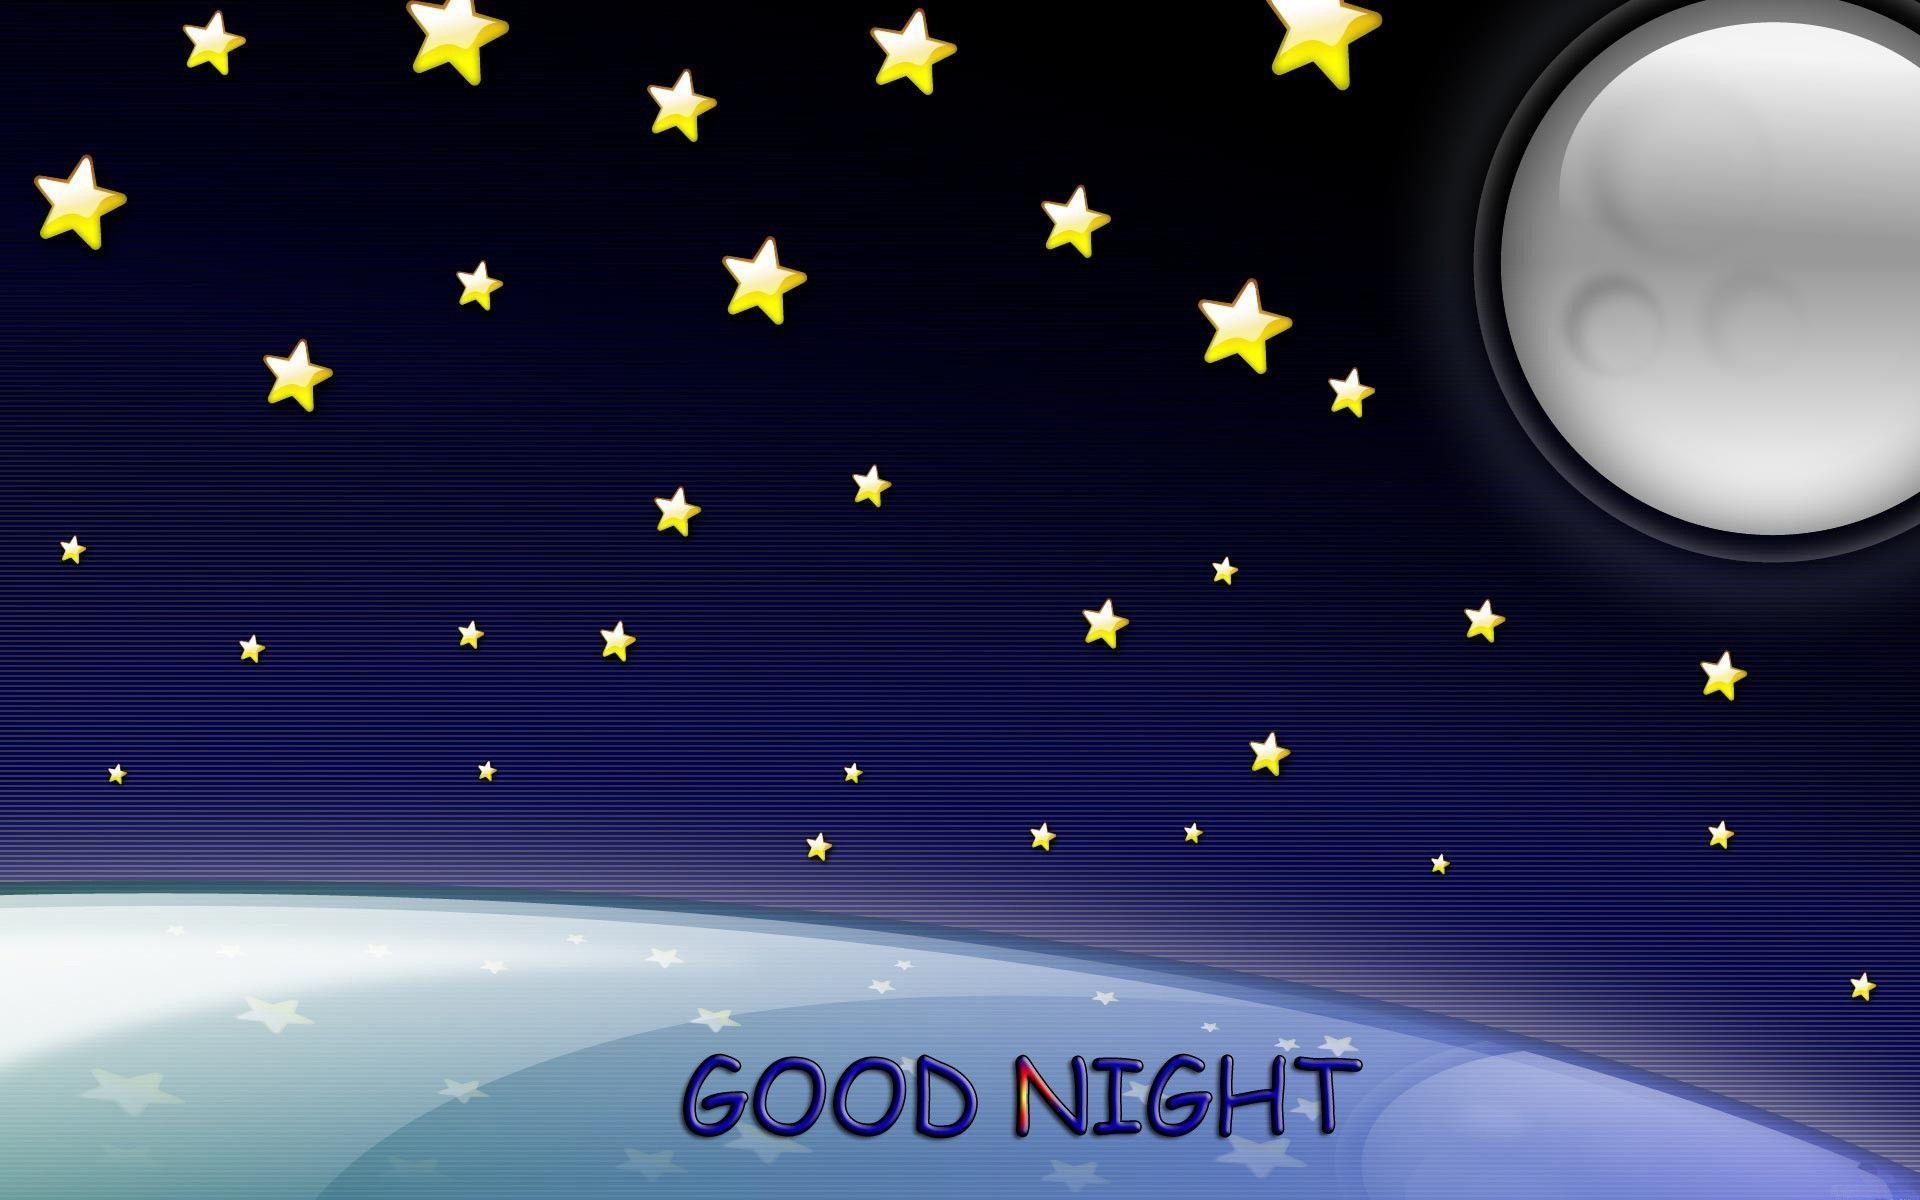 Wallpaper For > Good Night Wallpaper With Moon